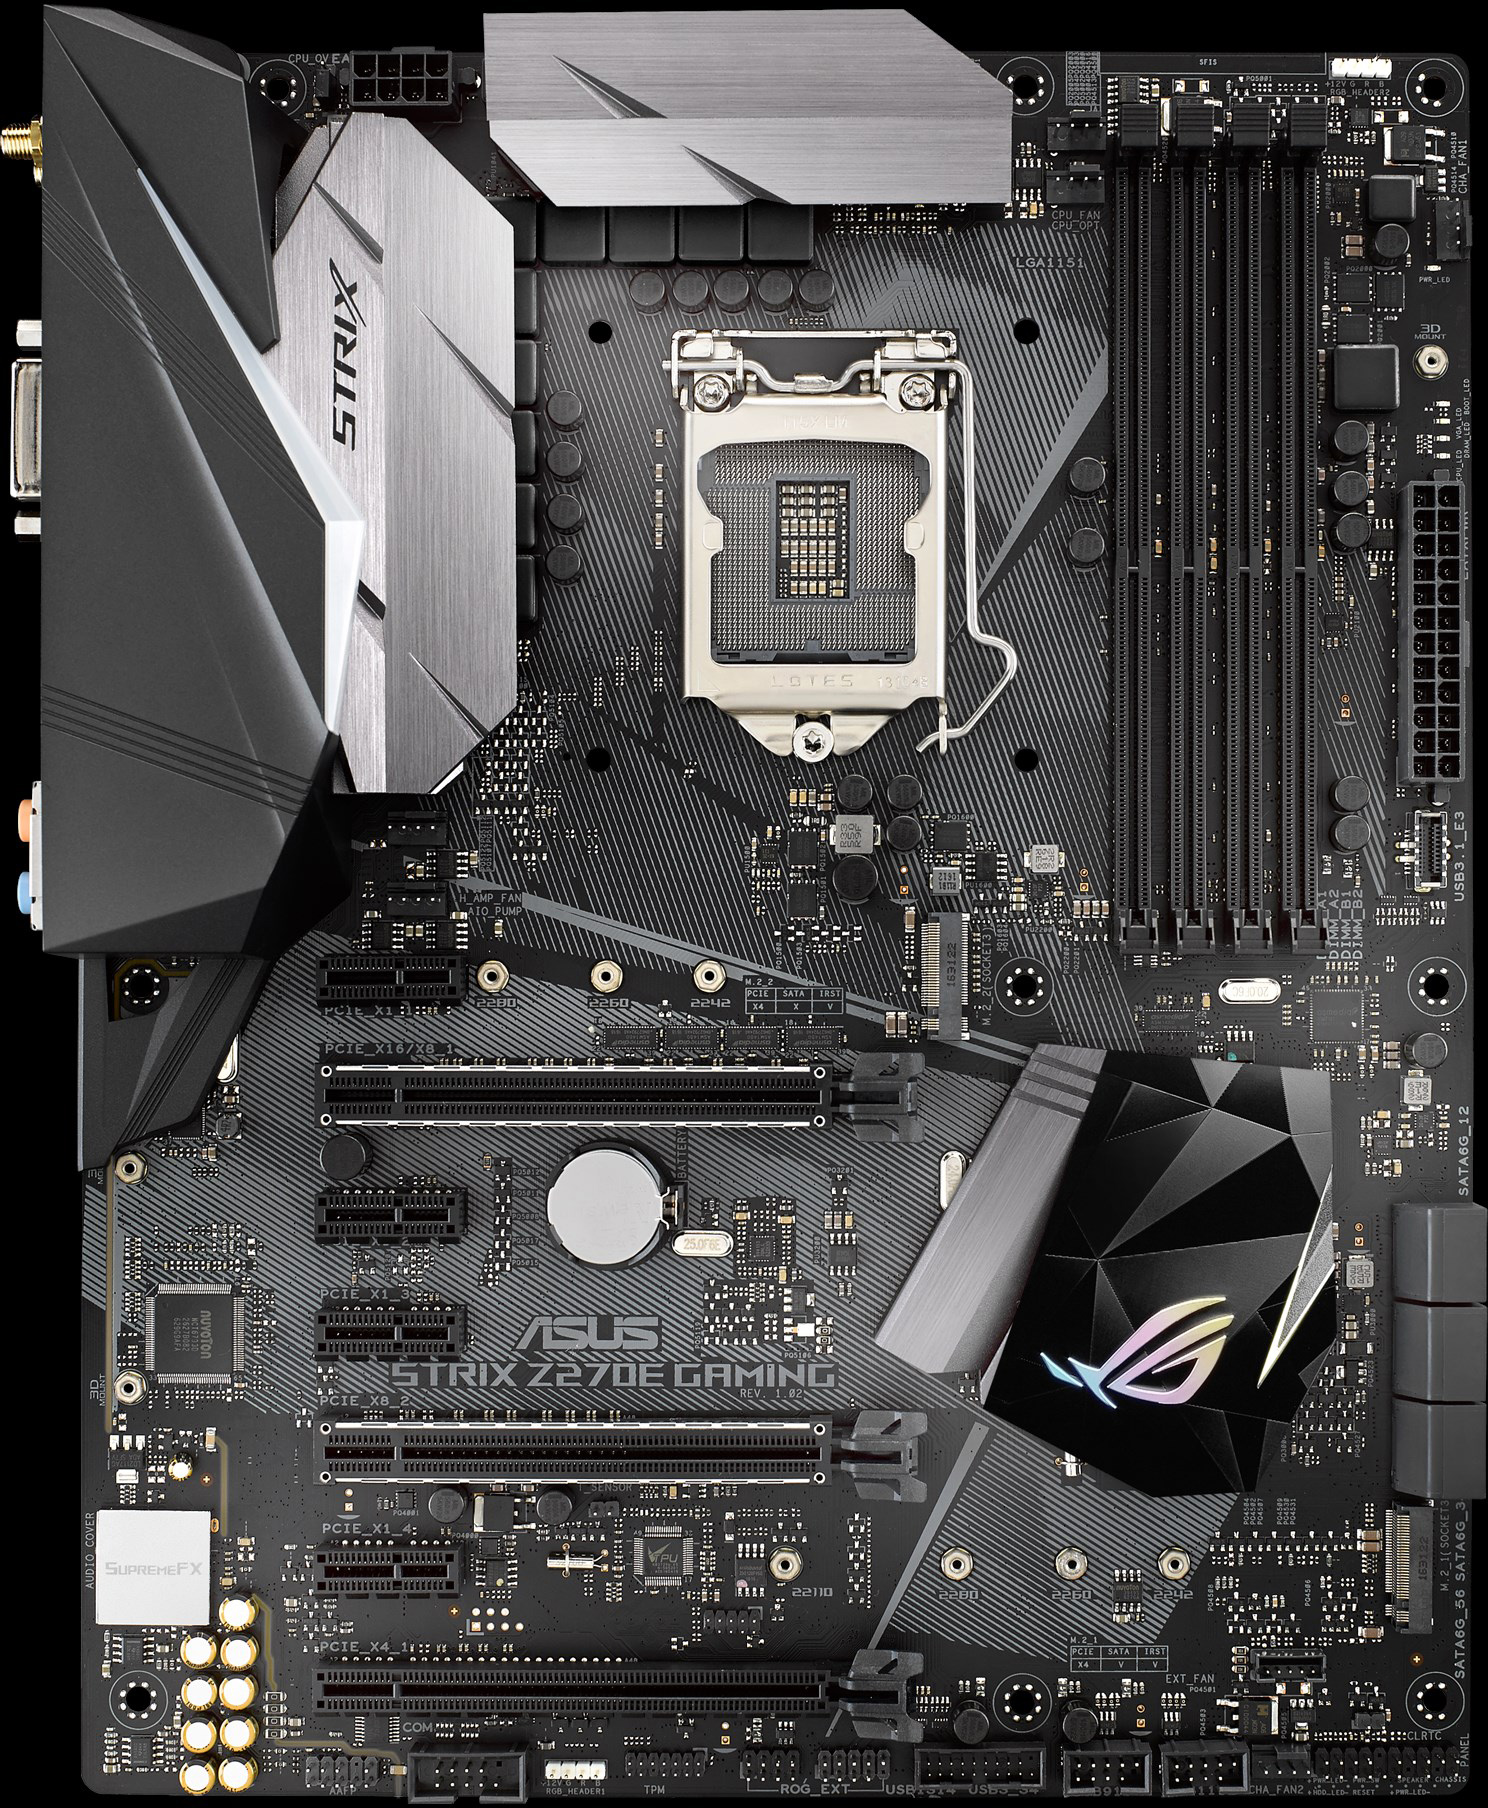 Asus Rog Strix Z270e Gaming Motherboard Specifications On Motherboarddb